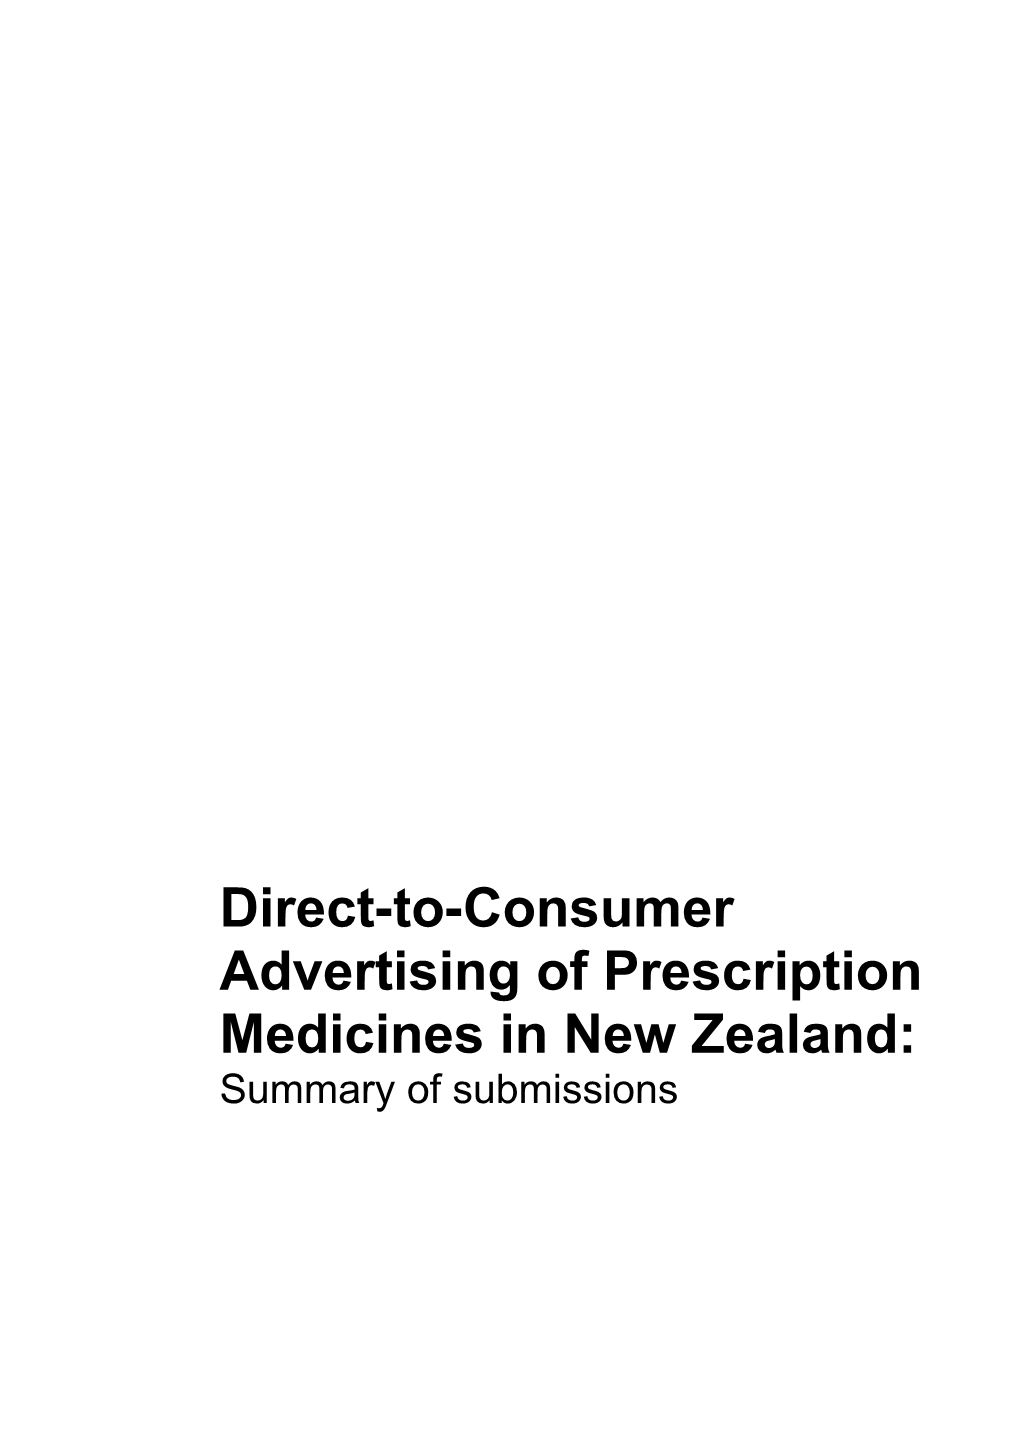 Direct-To-Consumer Advertising of Prescription Medicines in New Zealand: Summary of Submissions